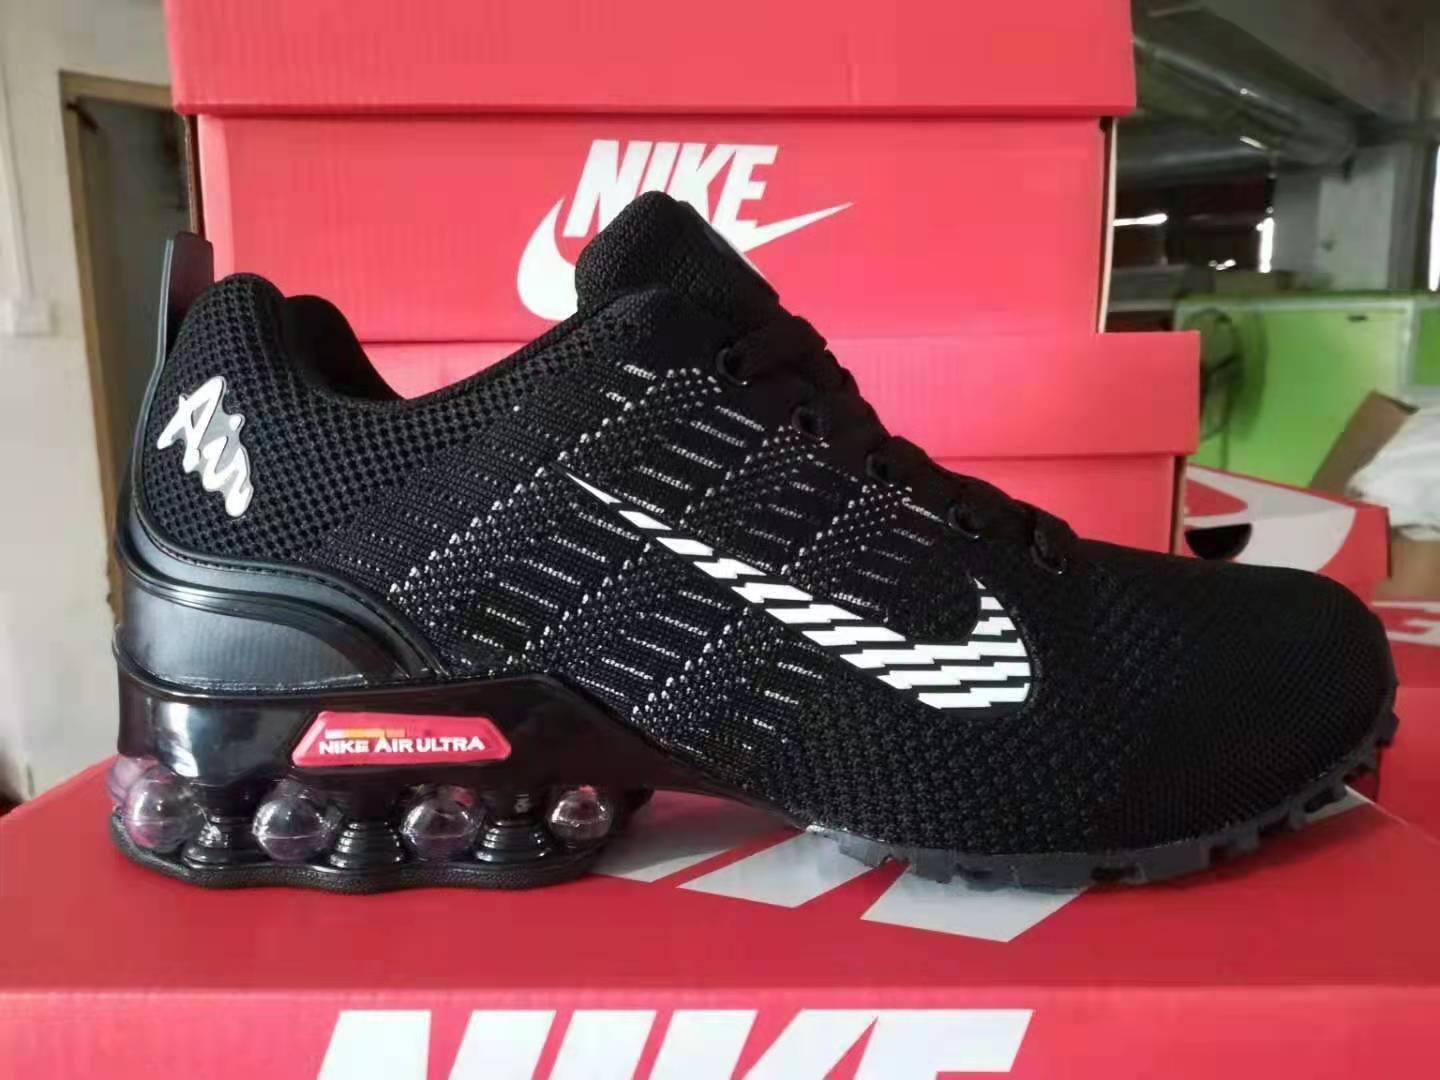 New Nike Air Ultra 2022 Black White Running Shoes